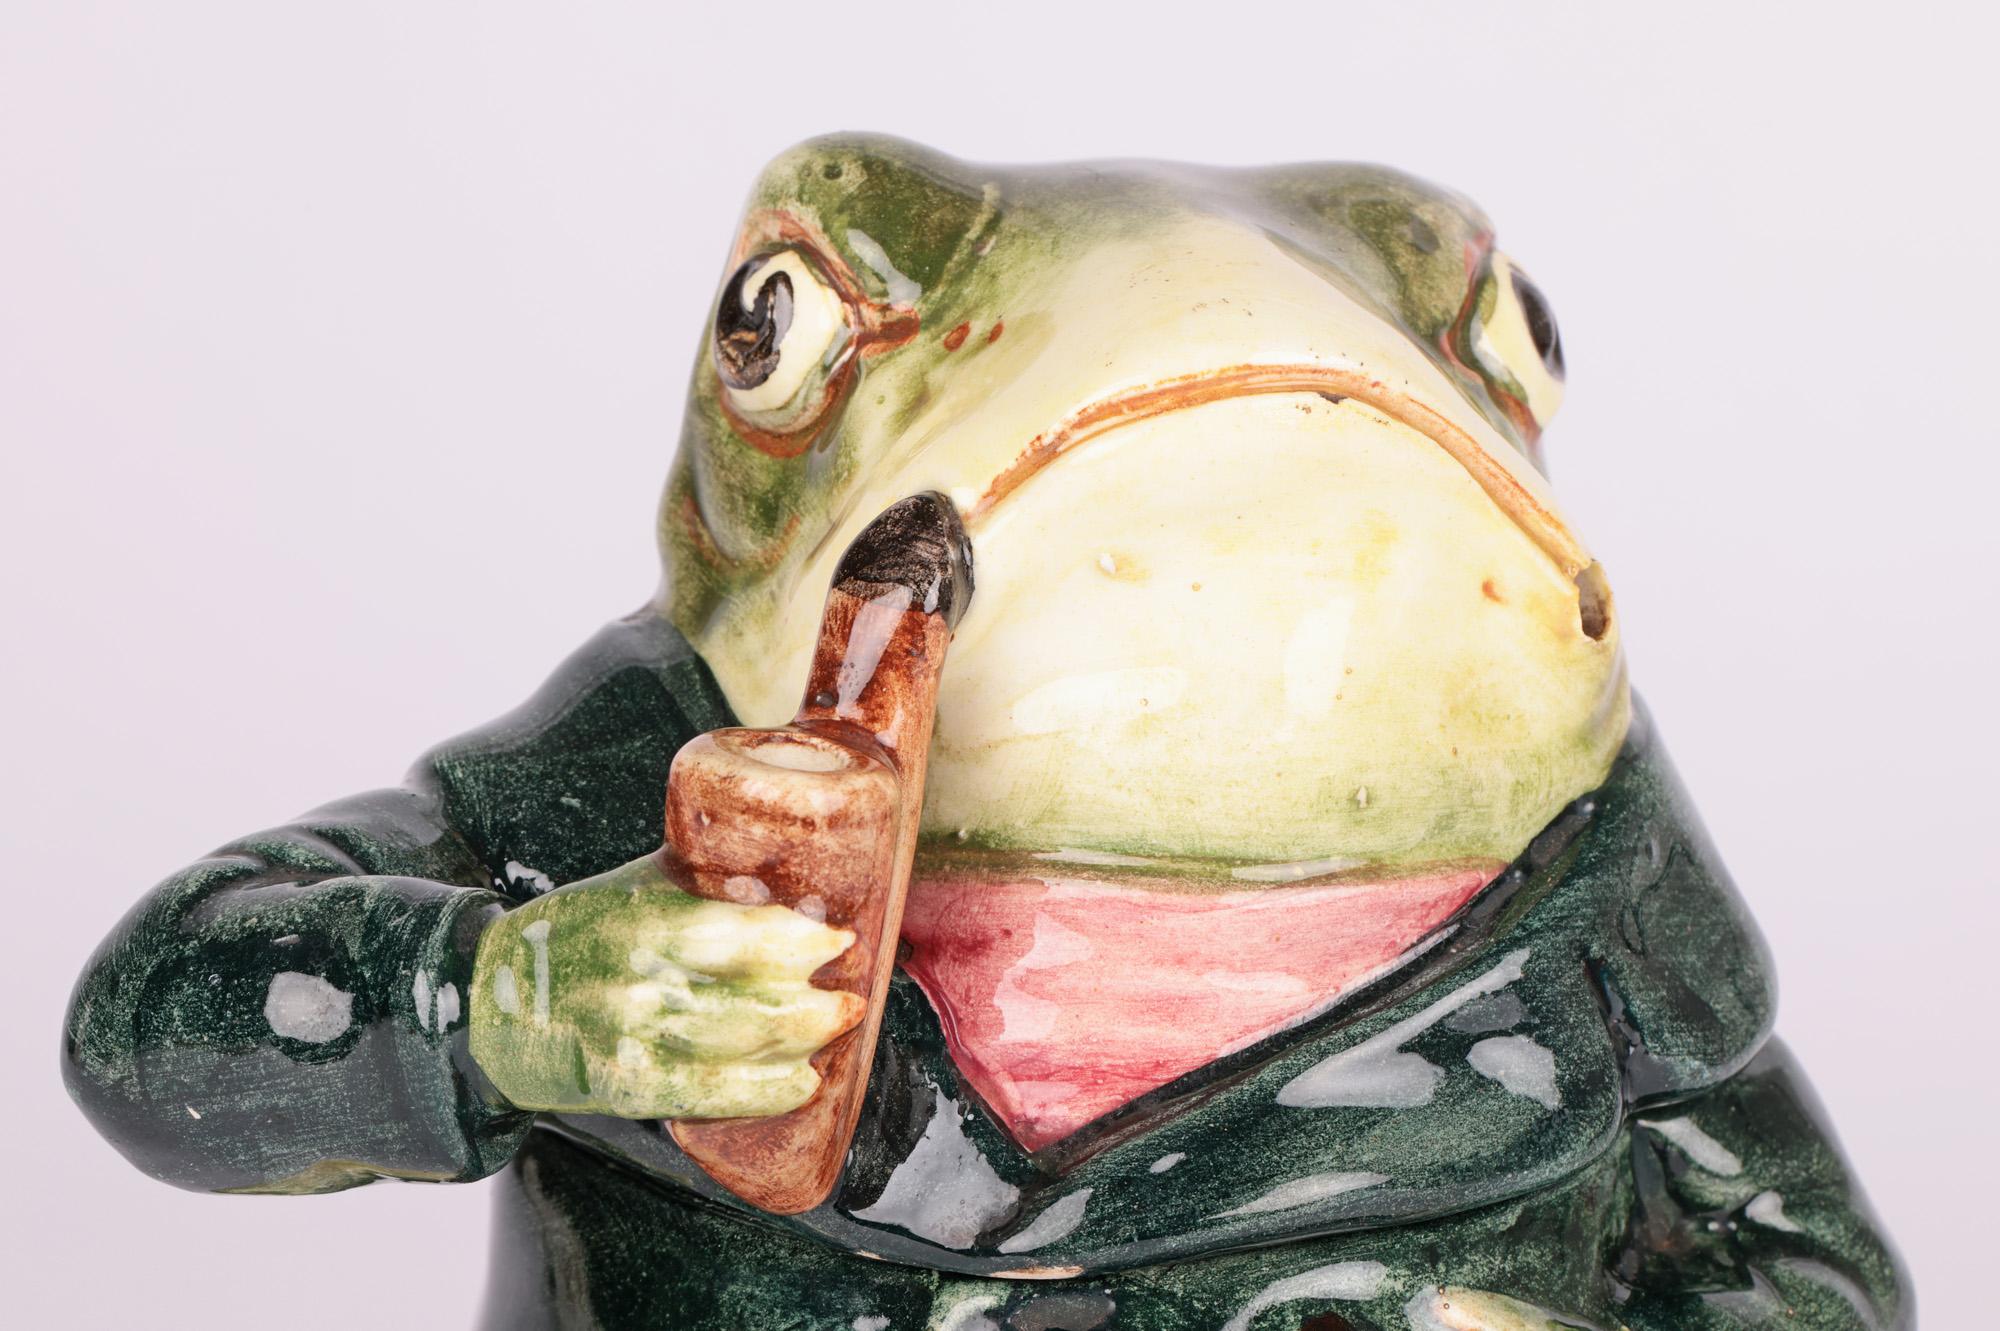 A scarce novelty Austrian majolica pottery tobacco jar modelled as a frog attributed to Bernard Bloch and dating from the latter 19th century. The lightly potted jar portrays a frog wearing a buttoned green jacket and pink cravat. He rests on leg on